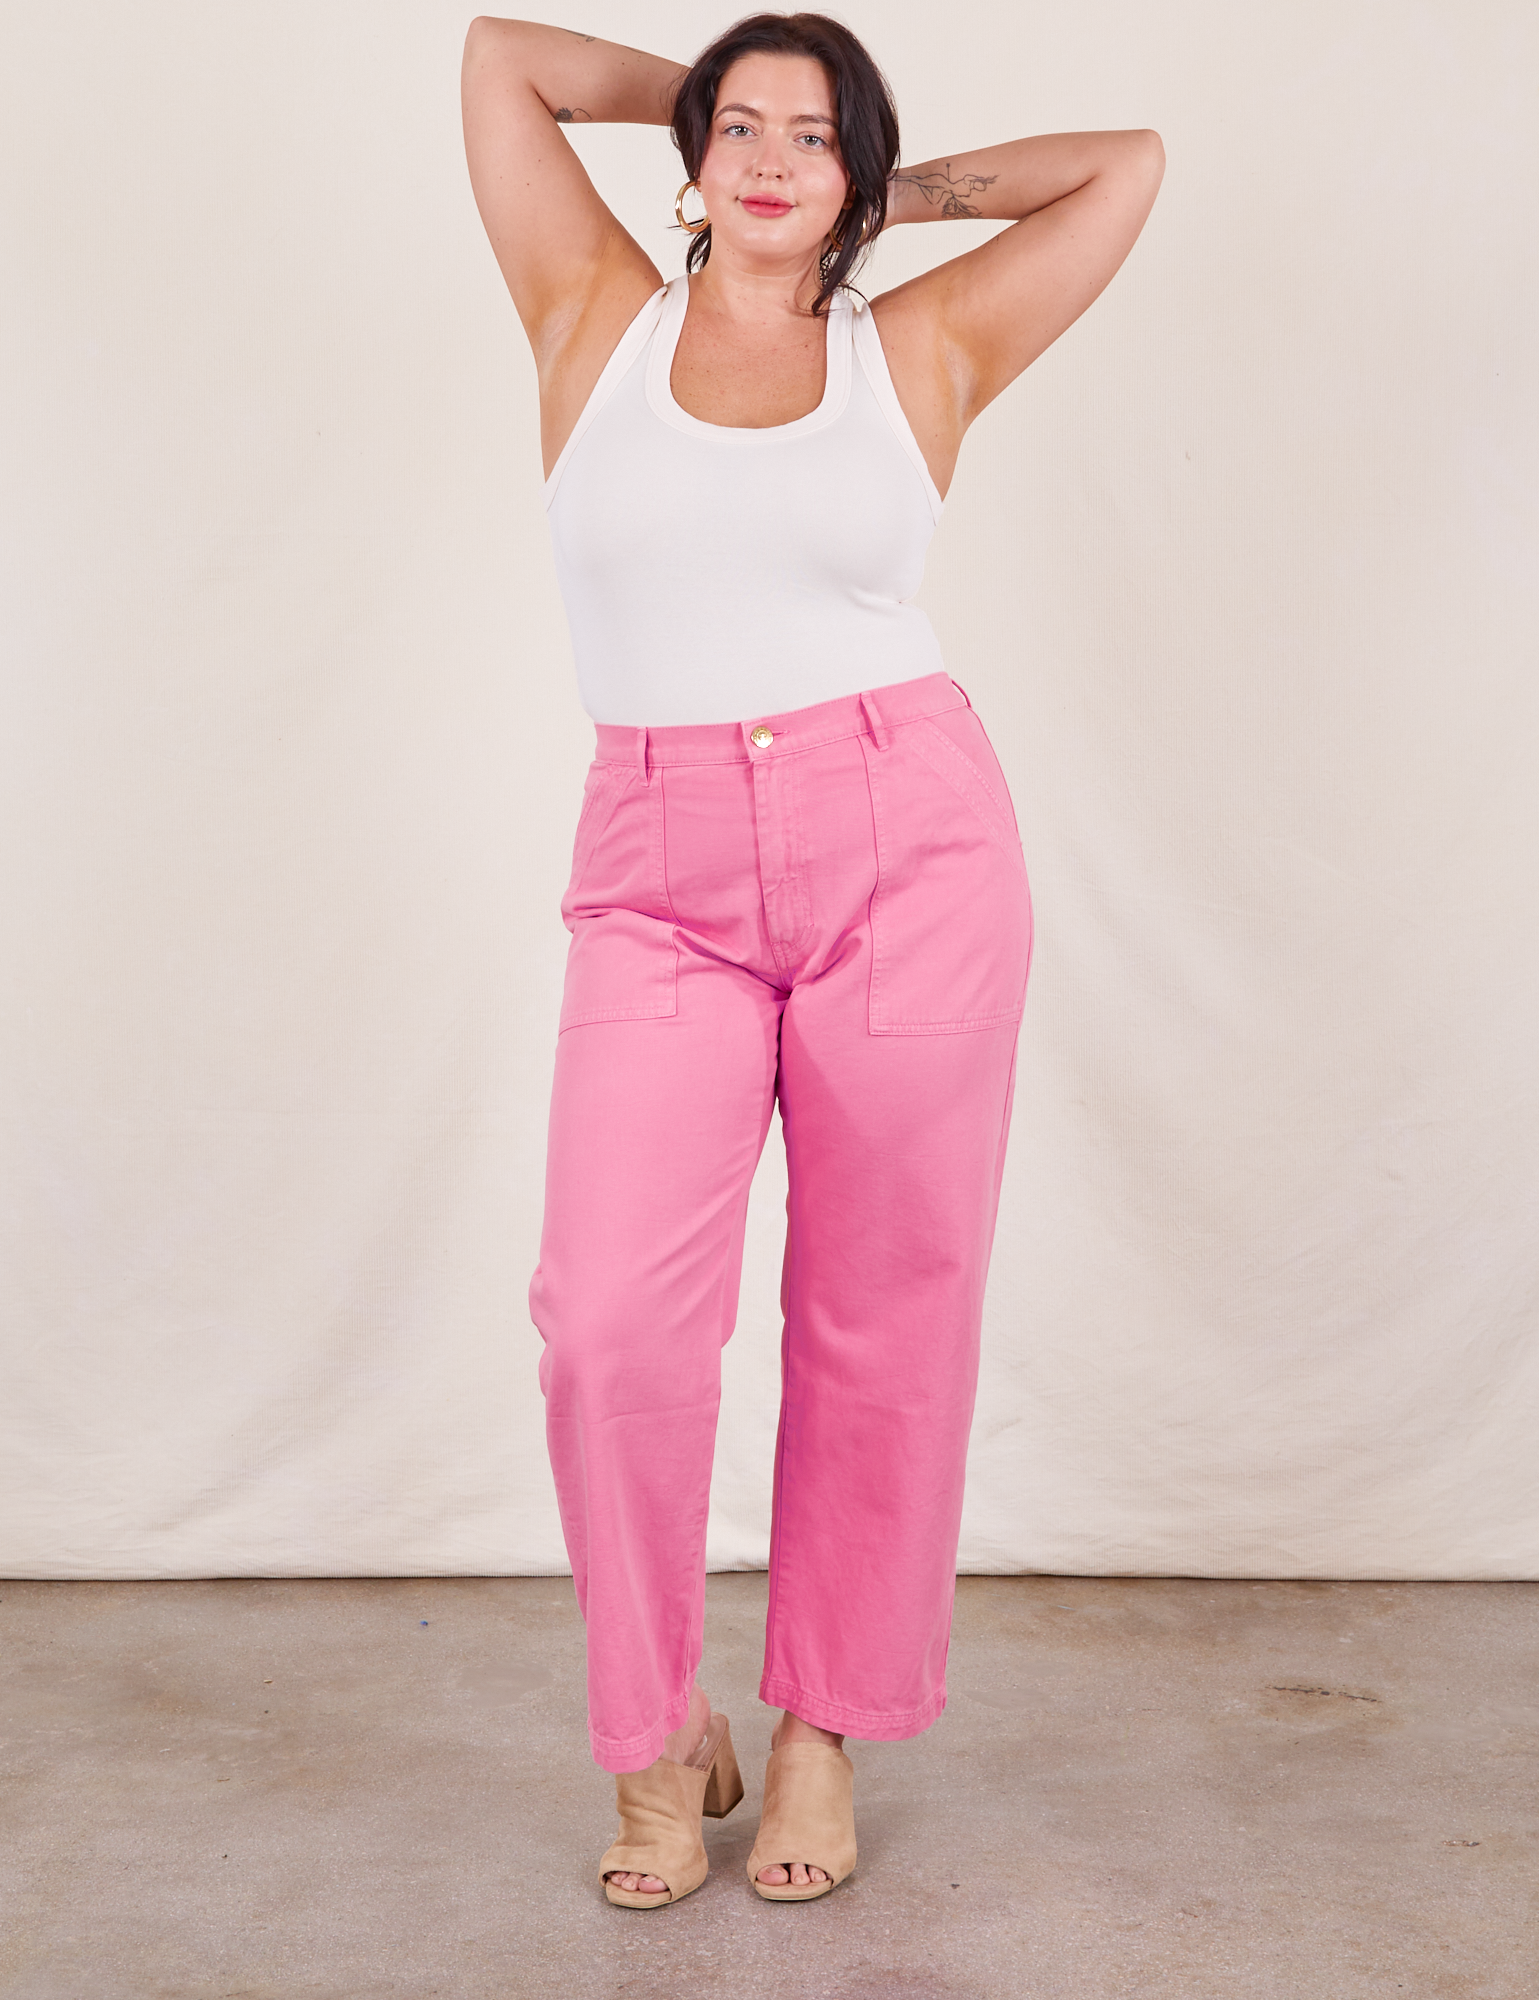 Faye is wearing Work Pants in Bubblegum Pink and a vintage off-white Tank Top